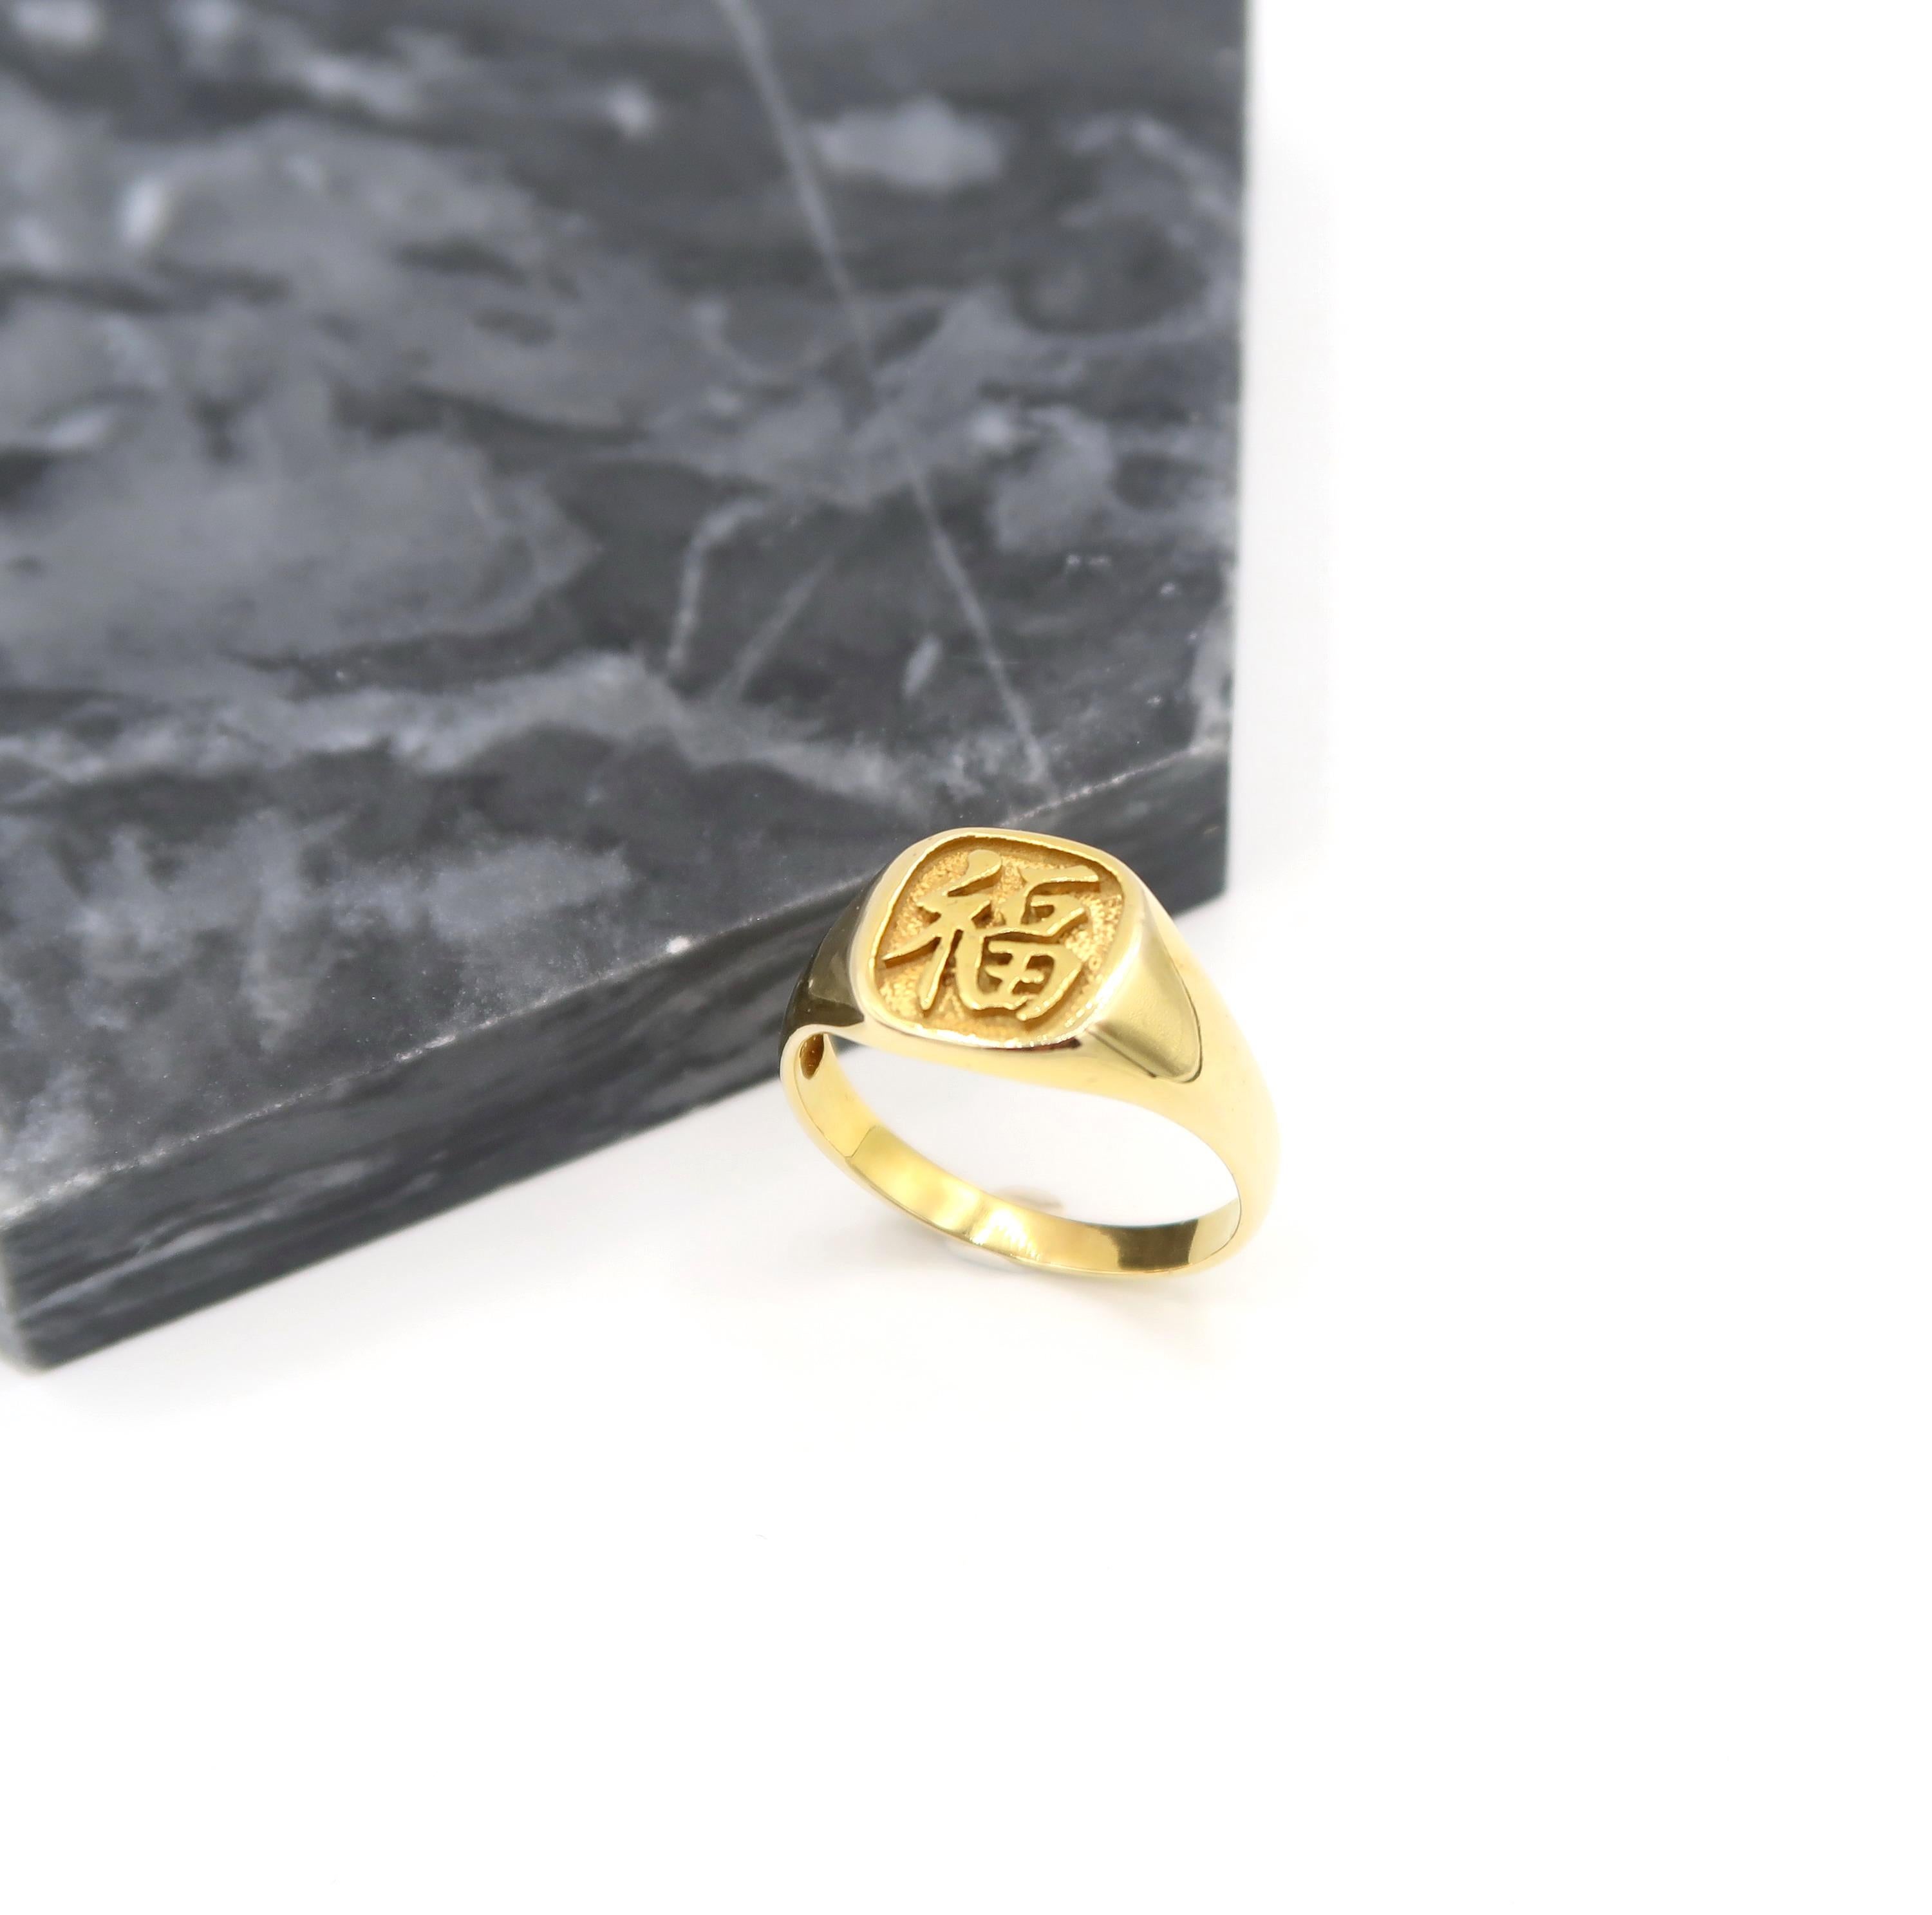 Chinese Character Fortune Luck Happiness 18 Karat Yellow Gold Signet Men's Ring

Please let us know should you wish to have the ring resized or engraved. 
Ring size: 55

Gold: 18K 3.32g.